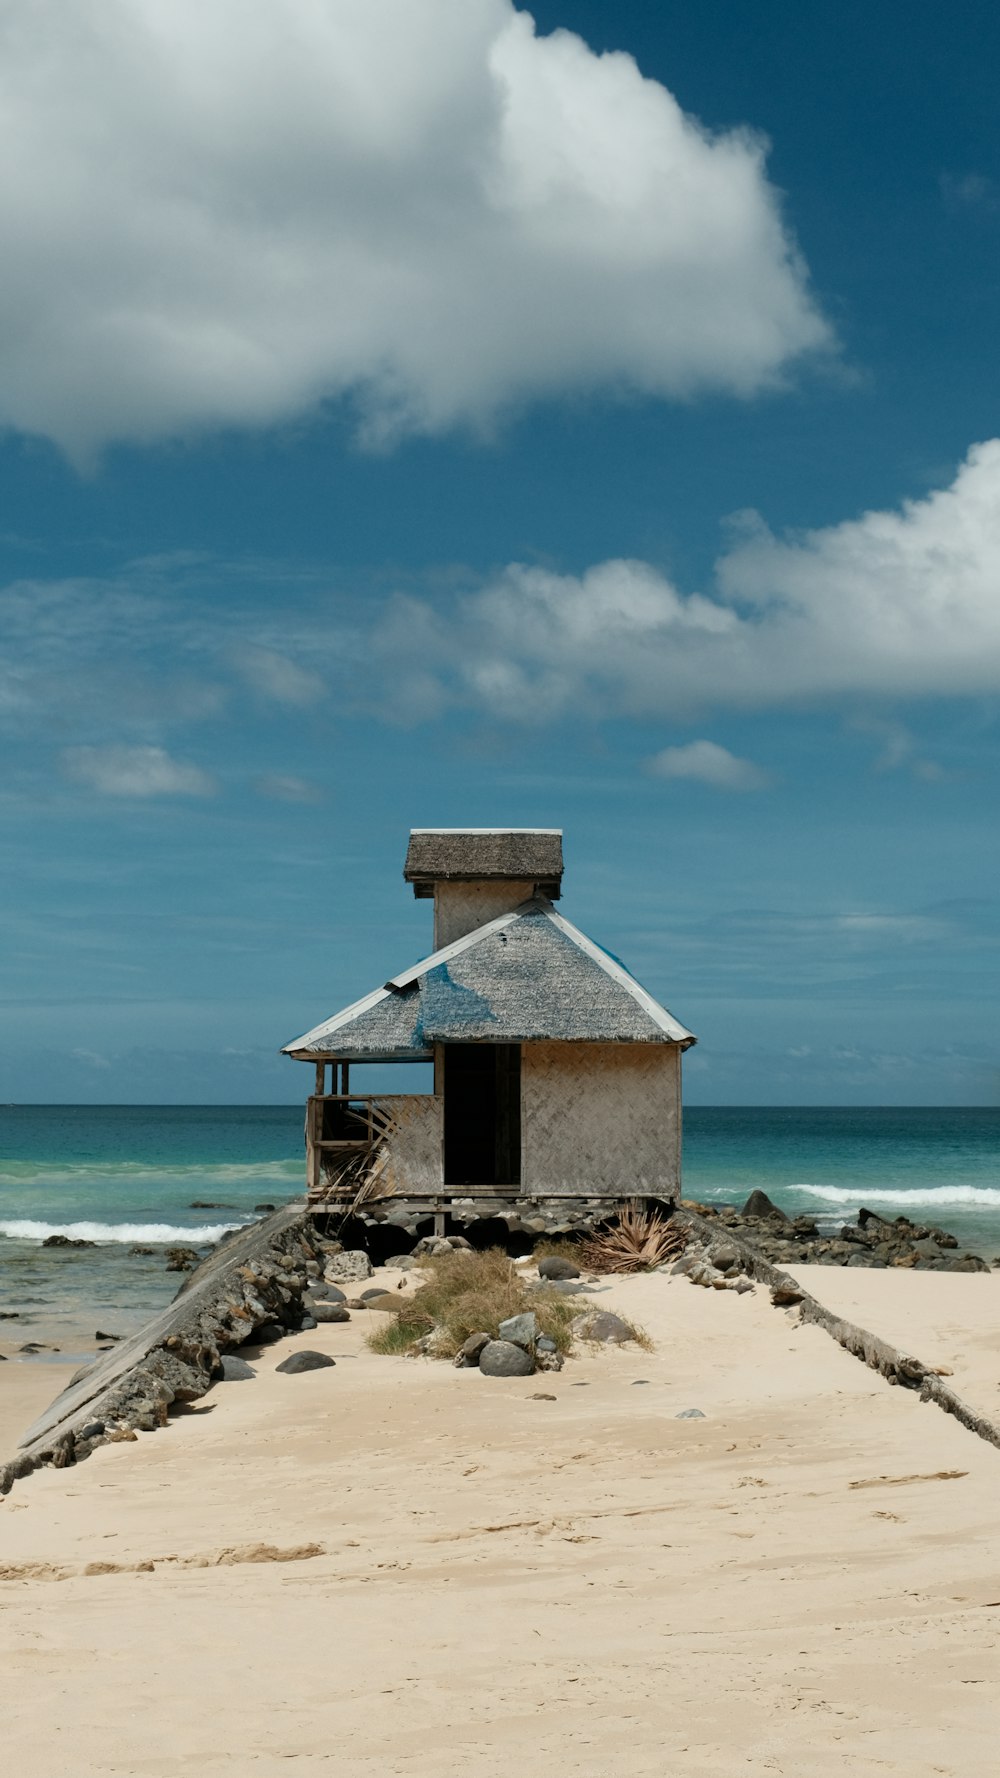 a small hut on a beach with the ocean in the background